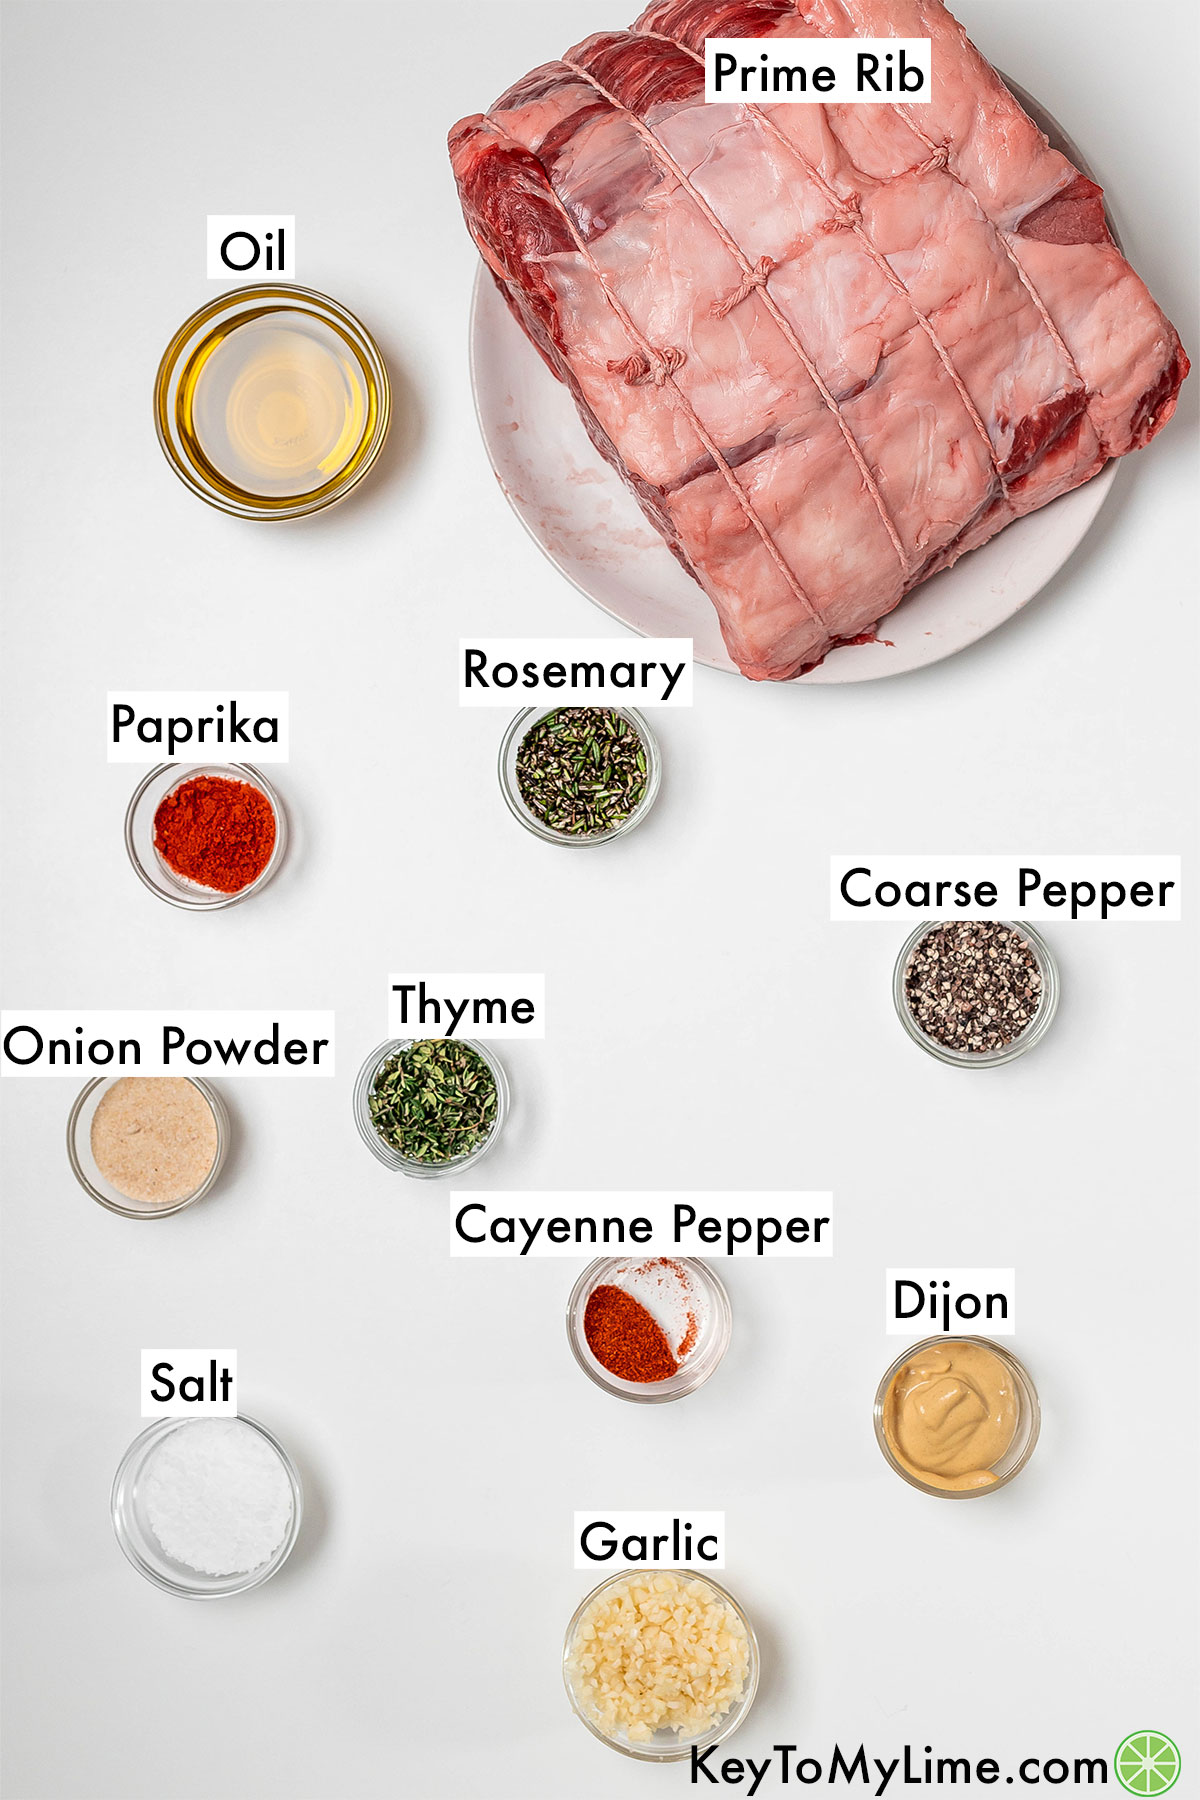 The labeled ingredients for air fryer prime rib.